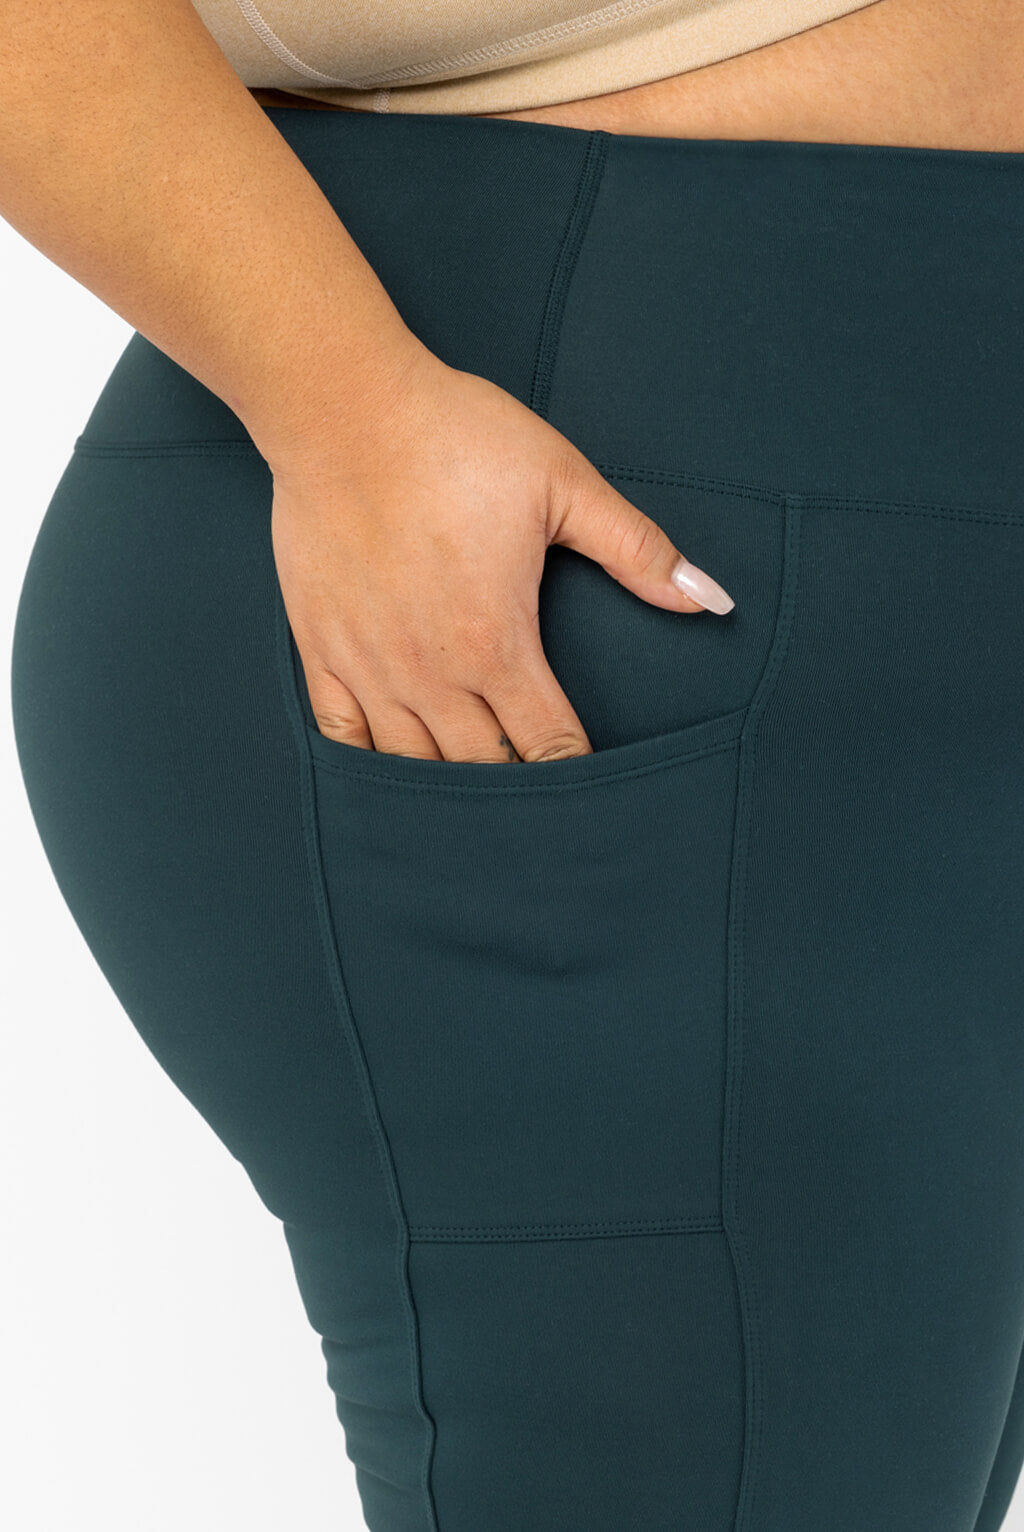 Plus Size Leggings with Pockets in Evergreen_large phone pocket